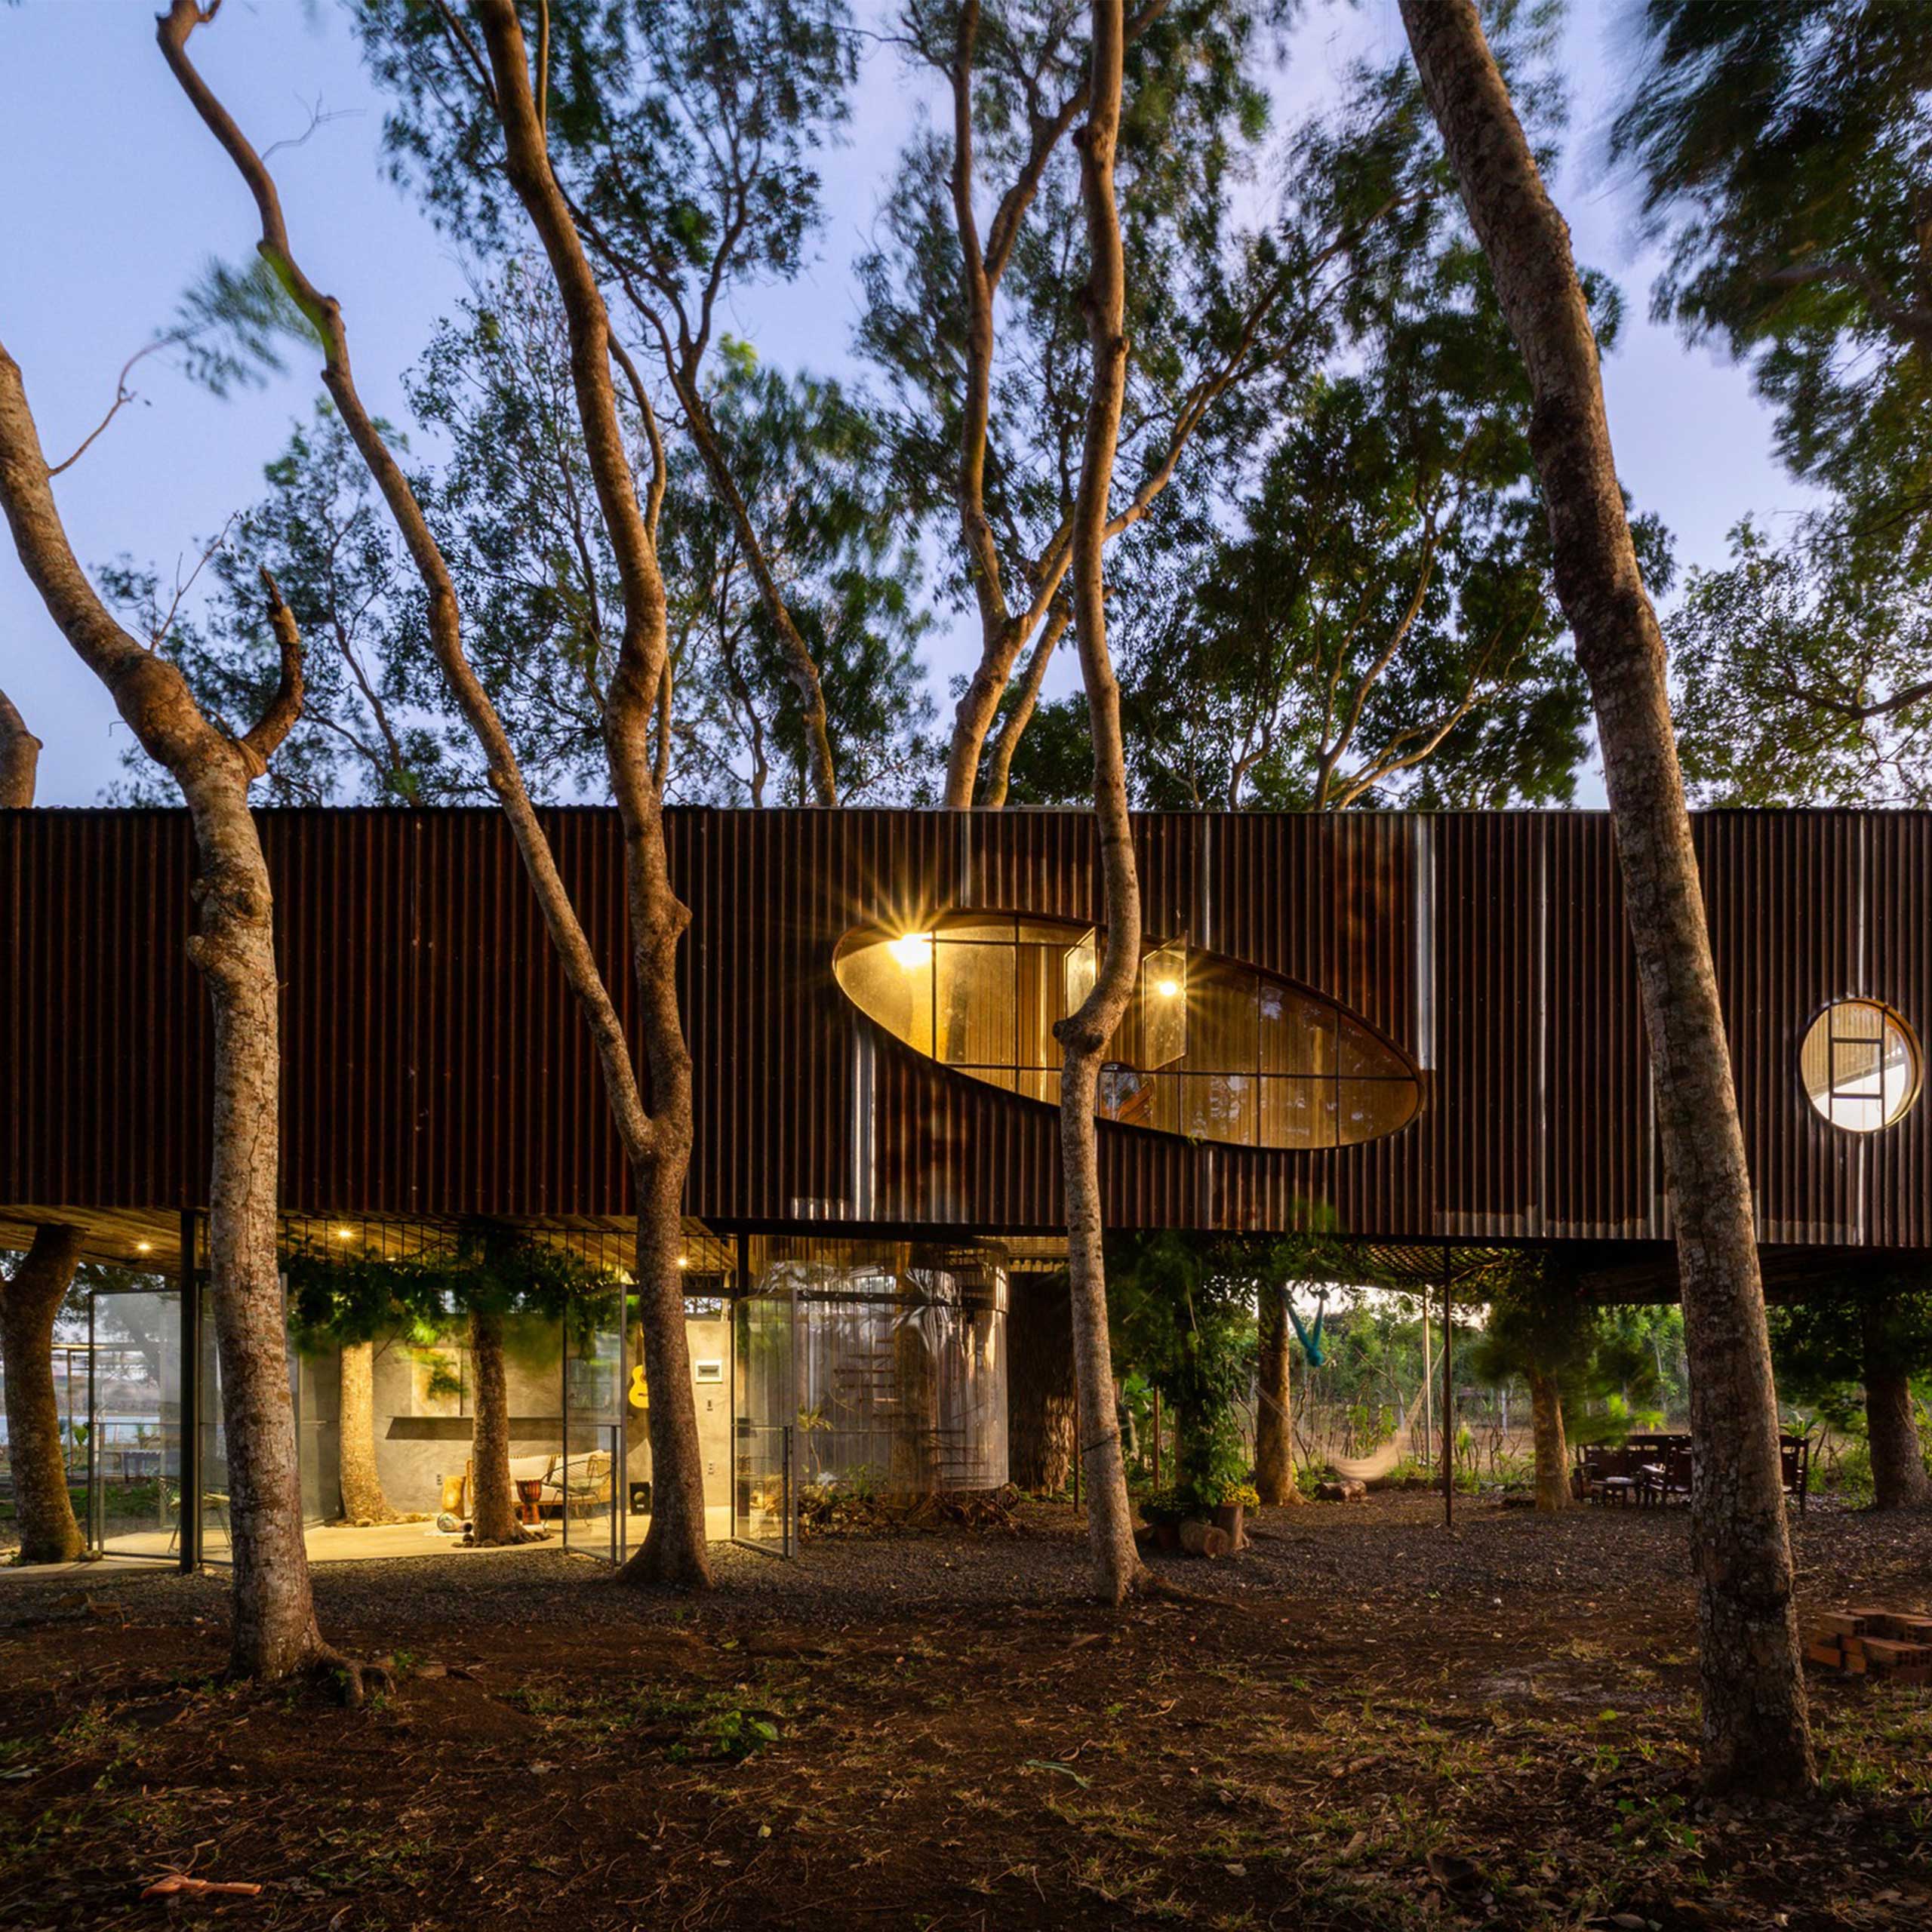 A elongated tree house with an oblong window surrounded by tall narrow trees.